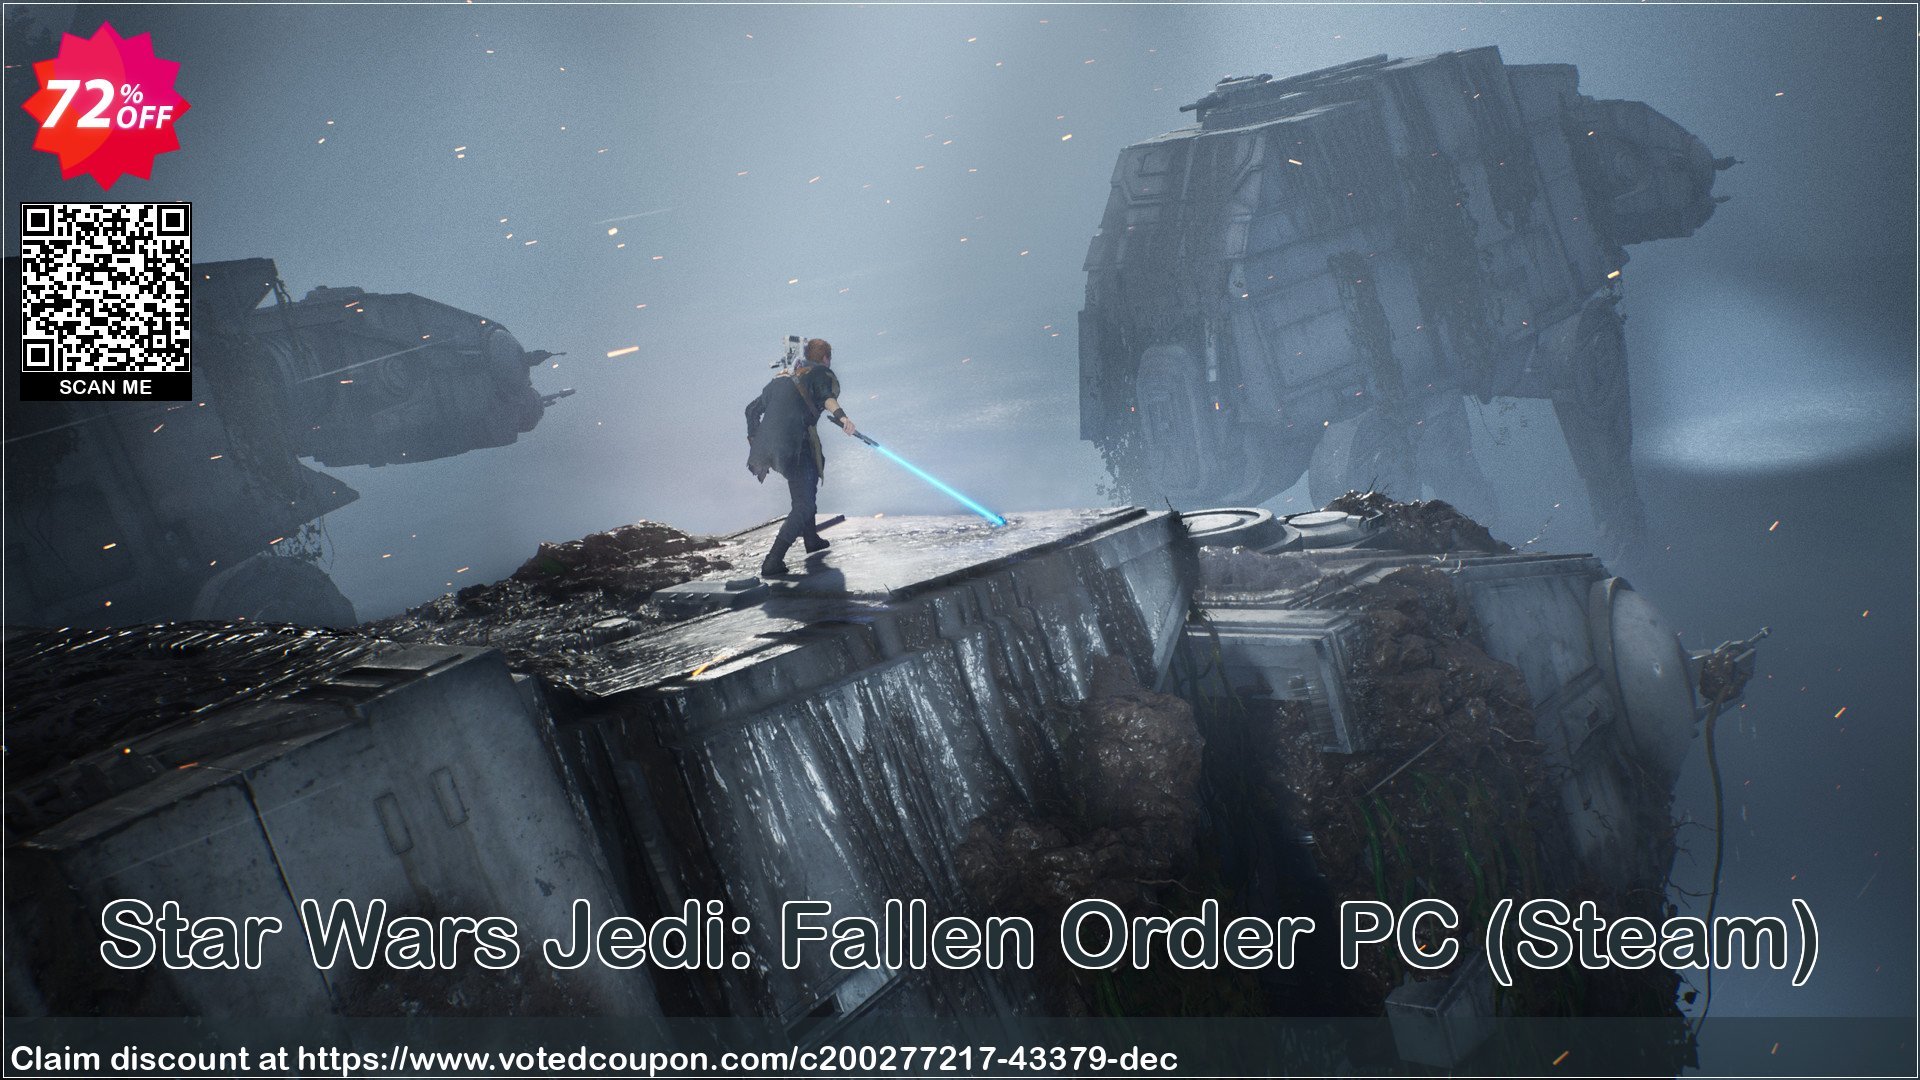 Star Wars Jedi: Fallen Order PC, Steam  Coupon Code May 2024, 72% OFF - VotedCoupon